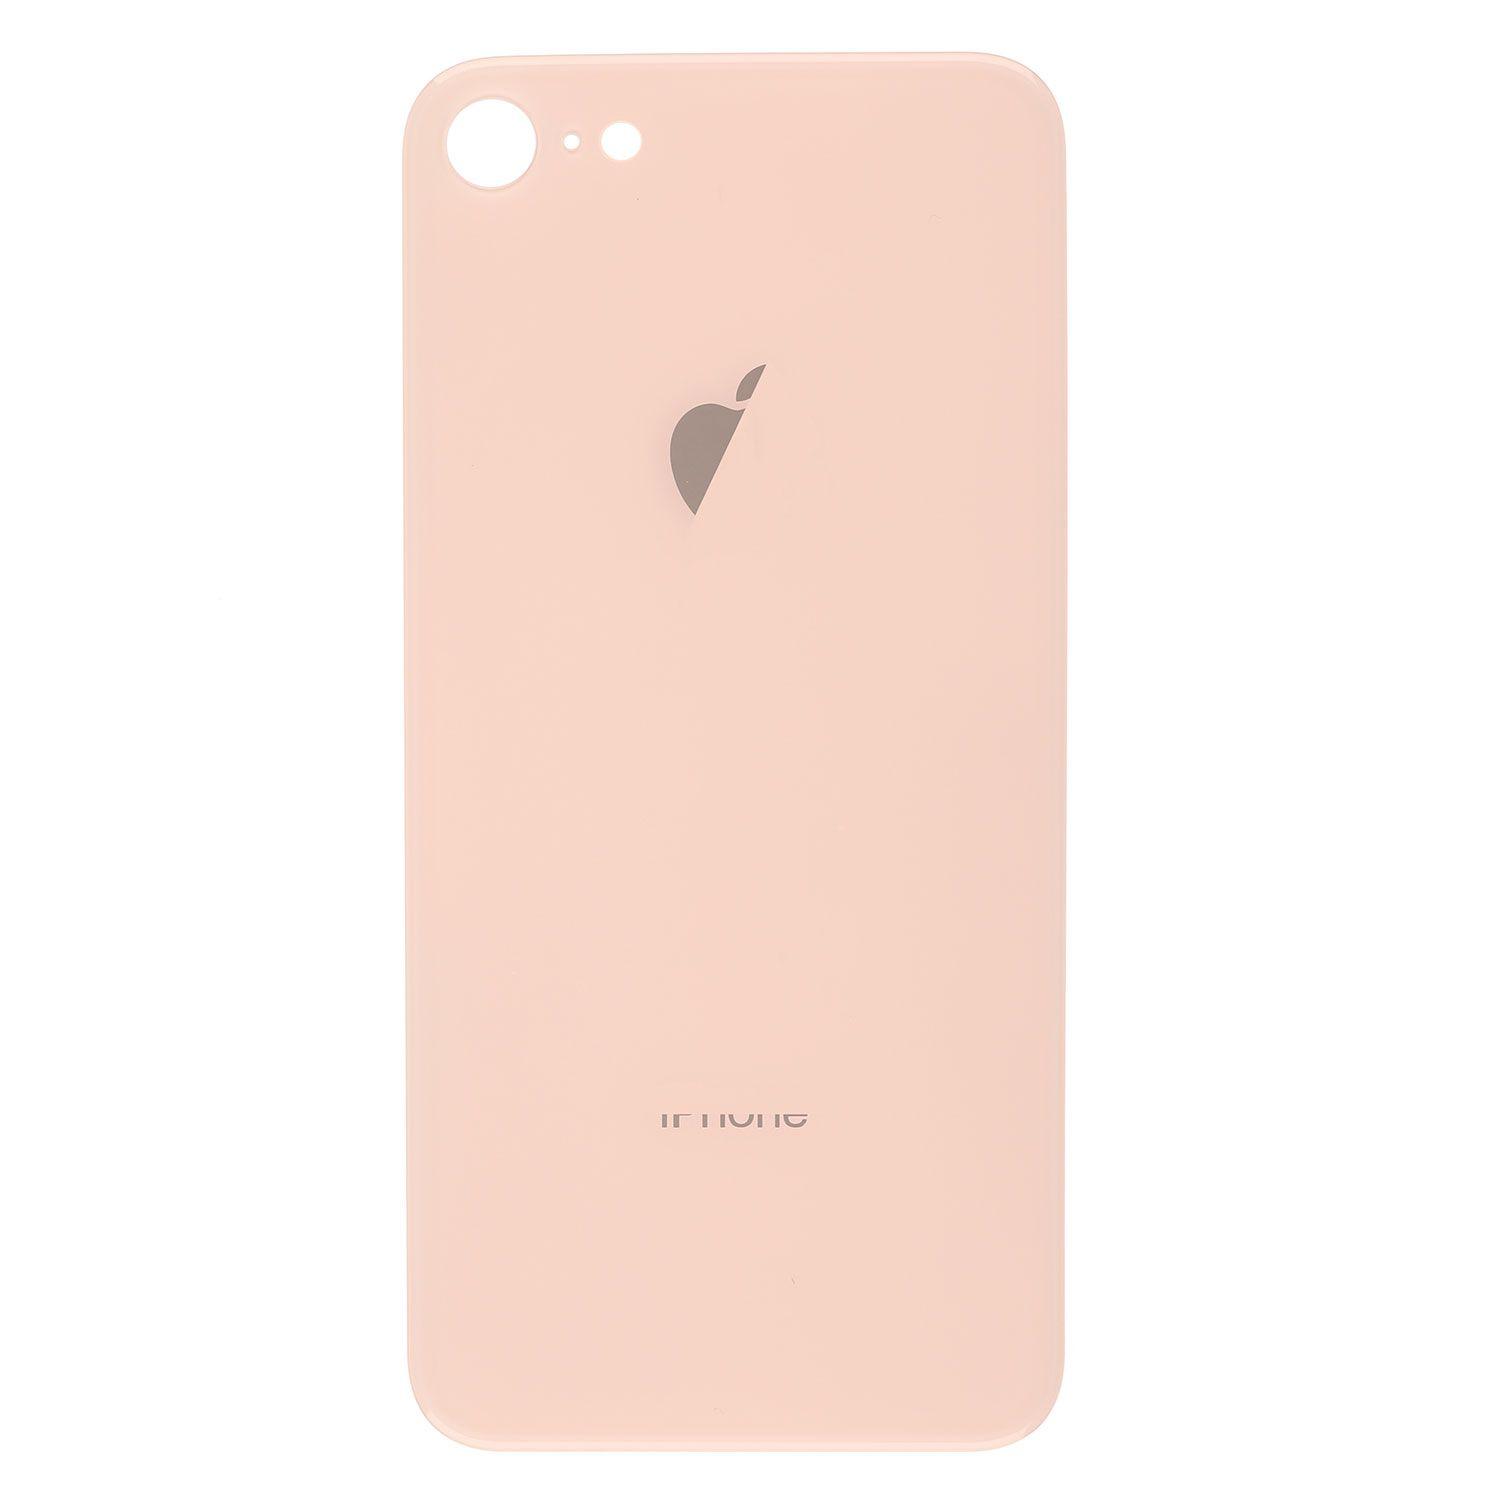 Battery cover iPhone 8 rose gold + camera glass